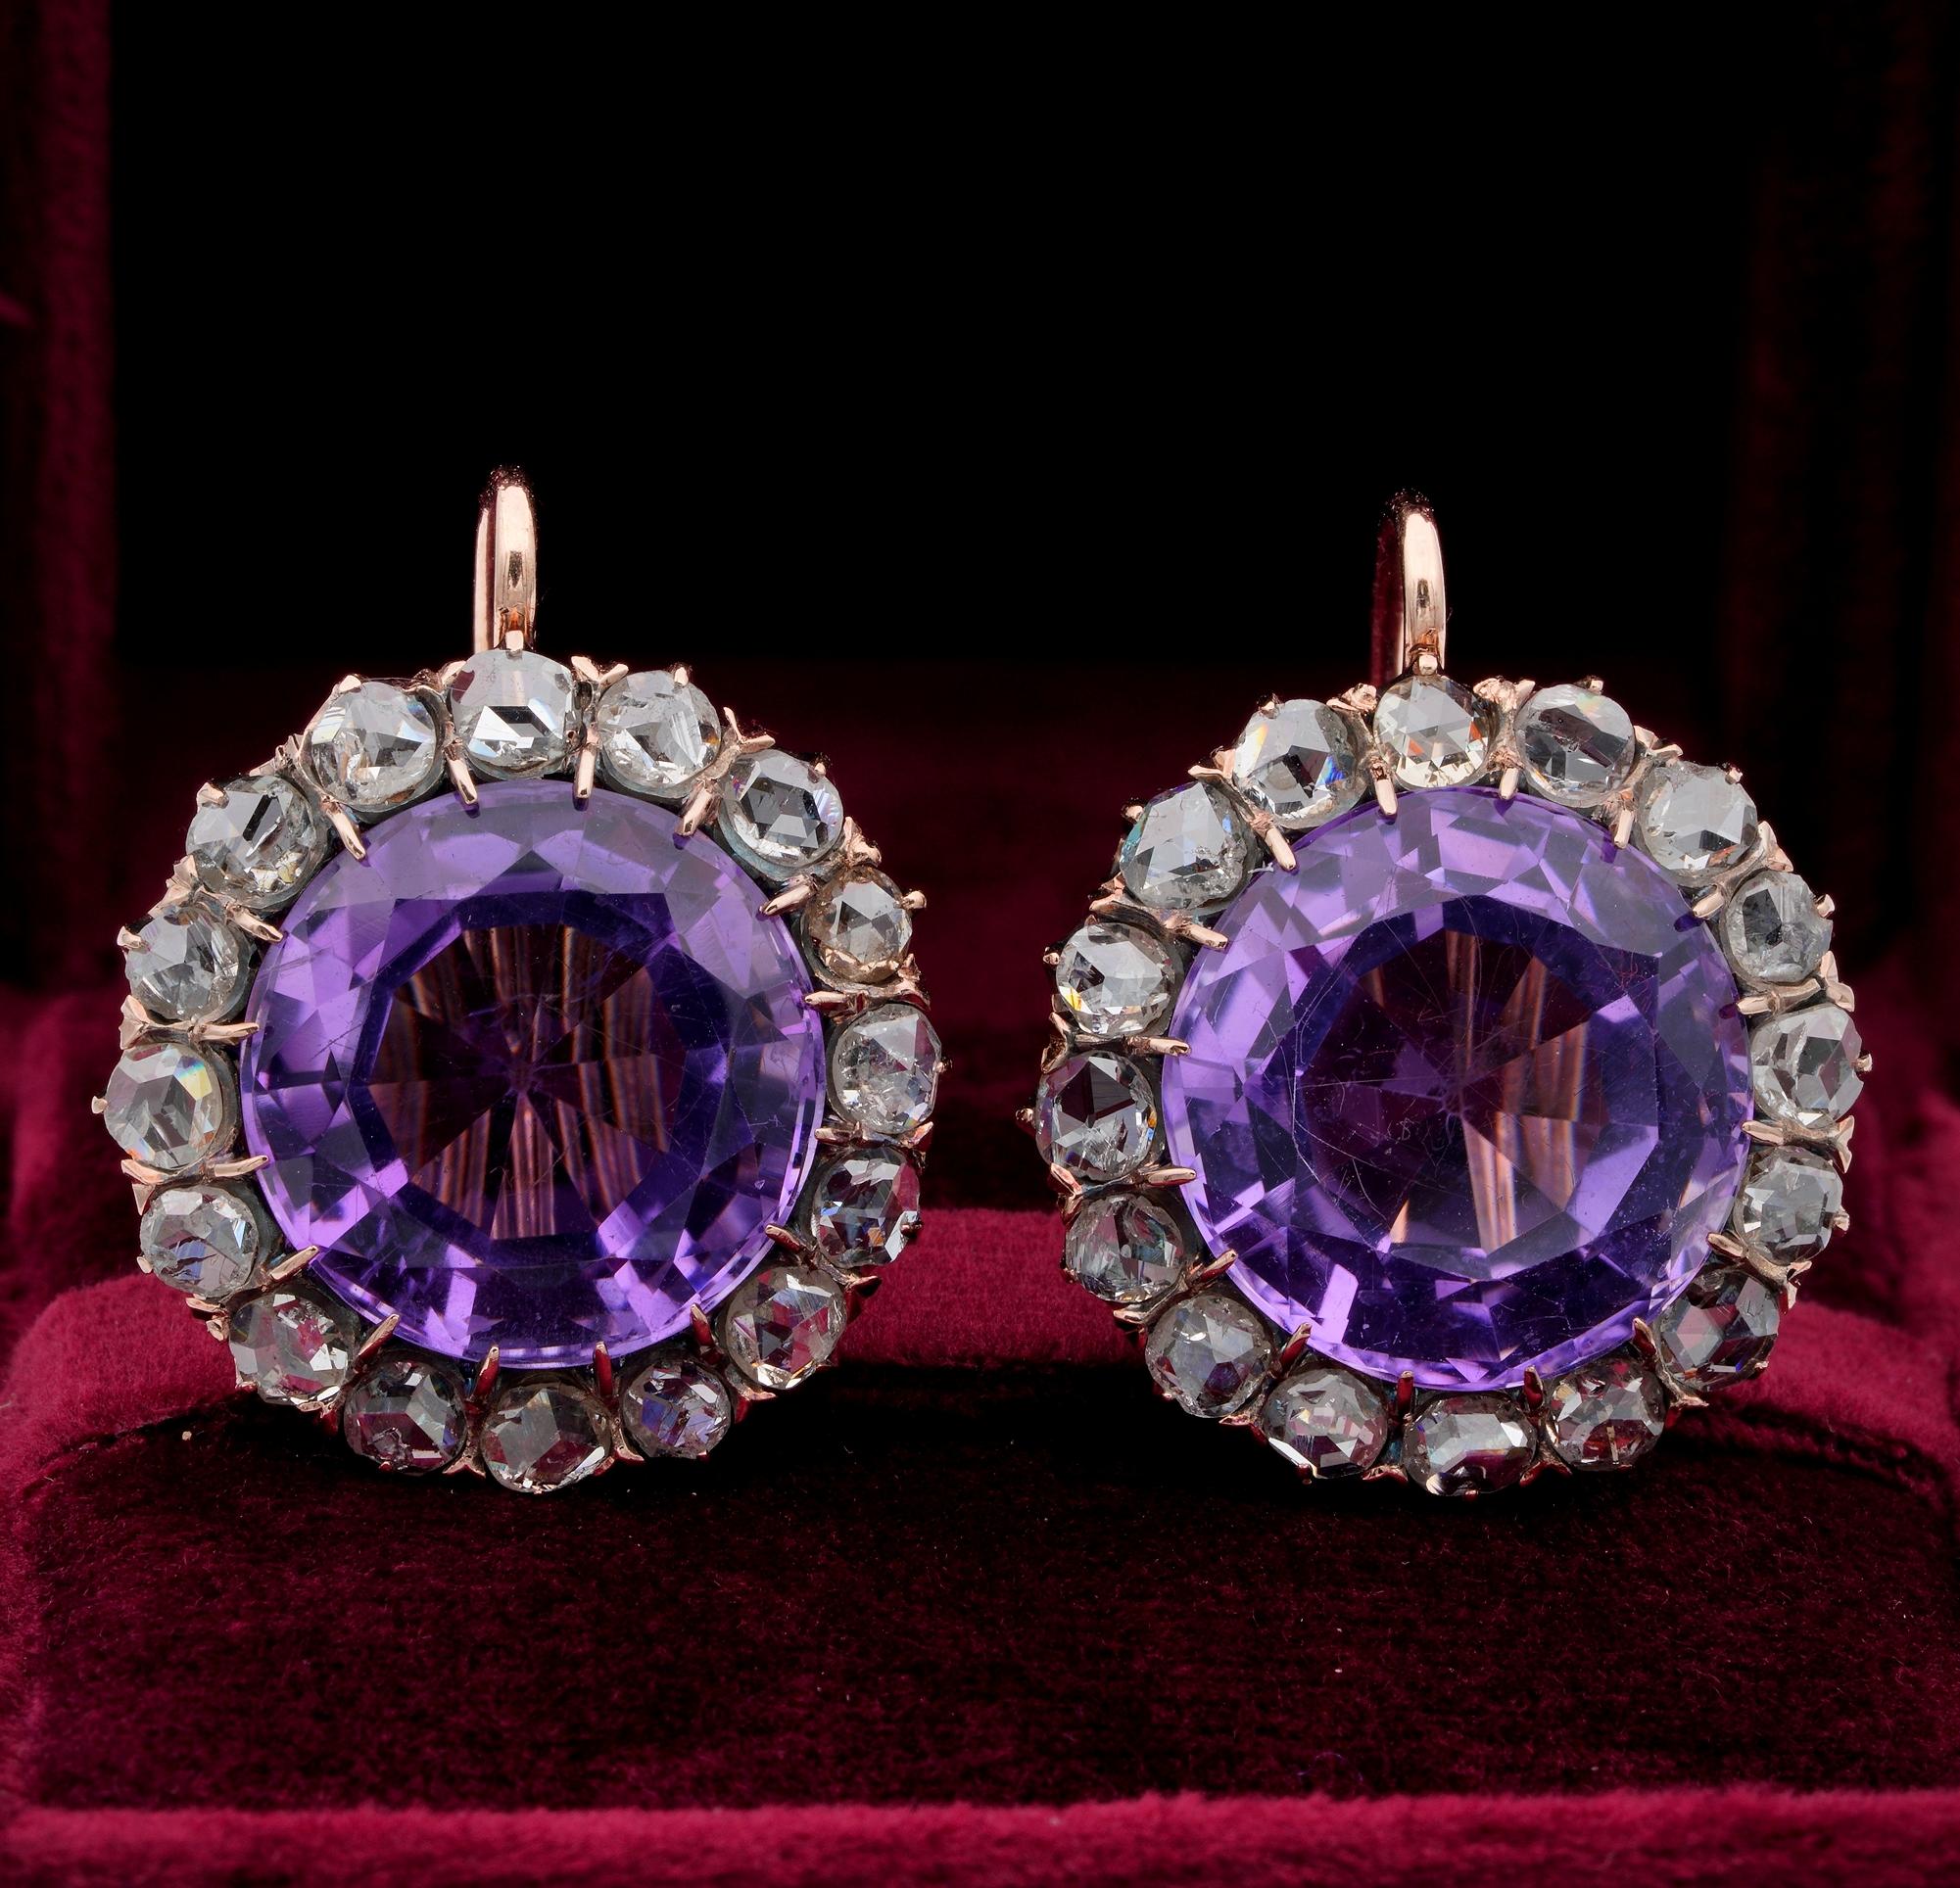 Victorian Statement Earrings

Rare Victorian period 1880 ca large sized Amethyst and Diamond Earrings
Victorian period statement earrings to wear and collect proudly
Hand crafted of solid 18 Kt gold
Holding two large sized approx 24.00 Ct natural